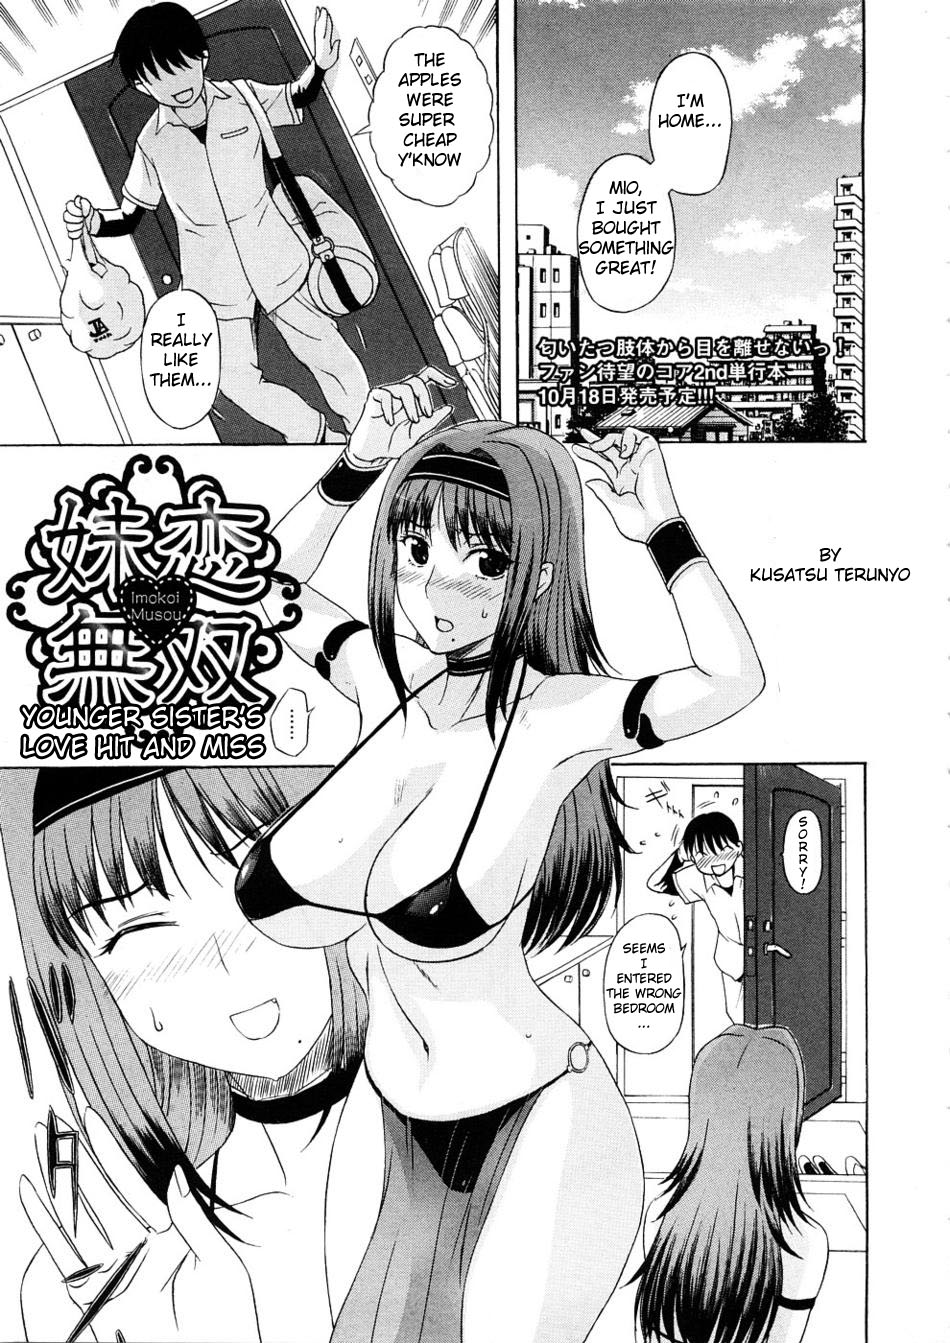 [Kusatsu Terunyo] Imokoi Musou - Younger Sister's Love Hit and Miss [ENG] page 1 full